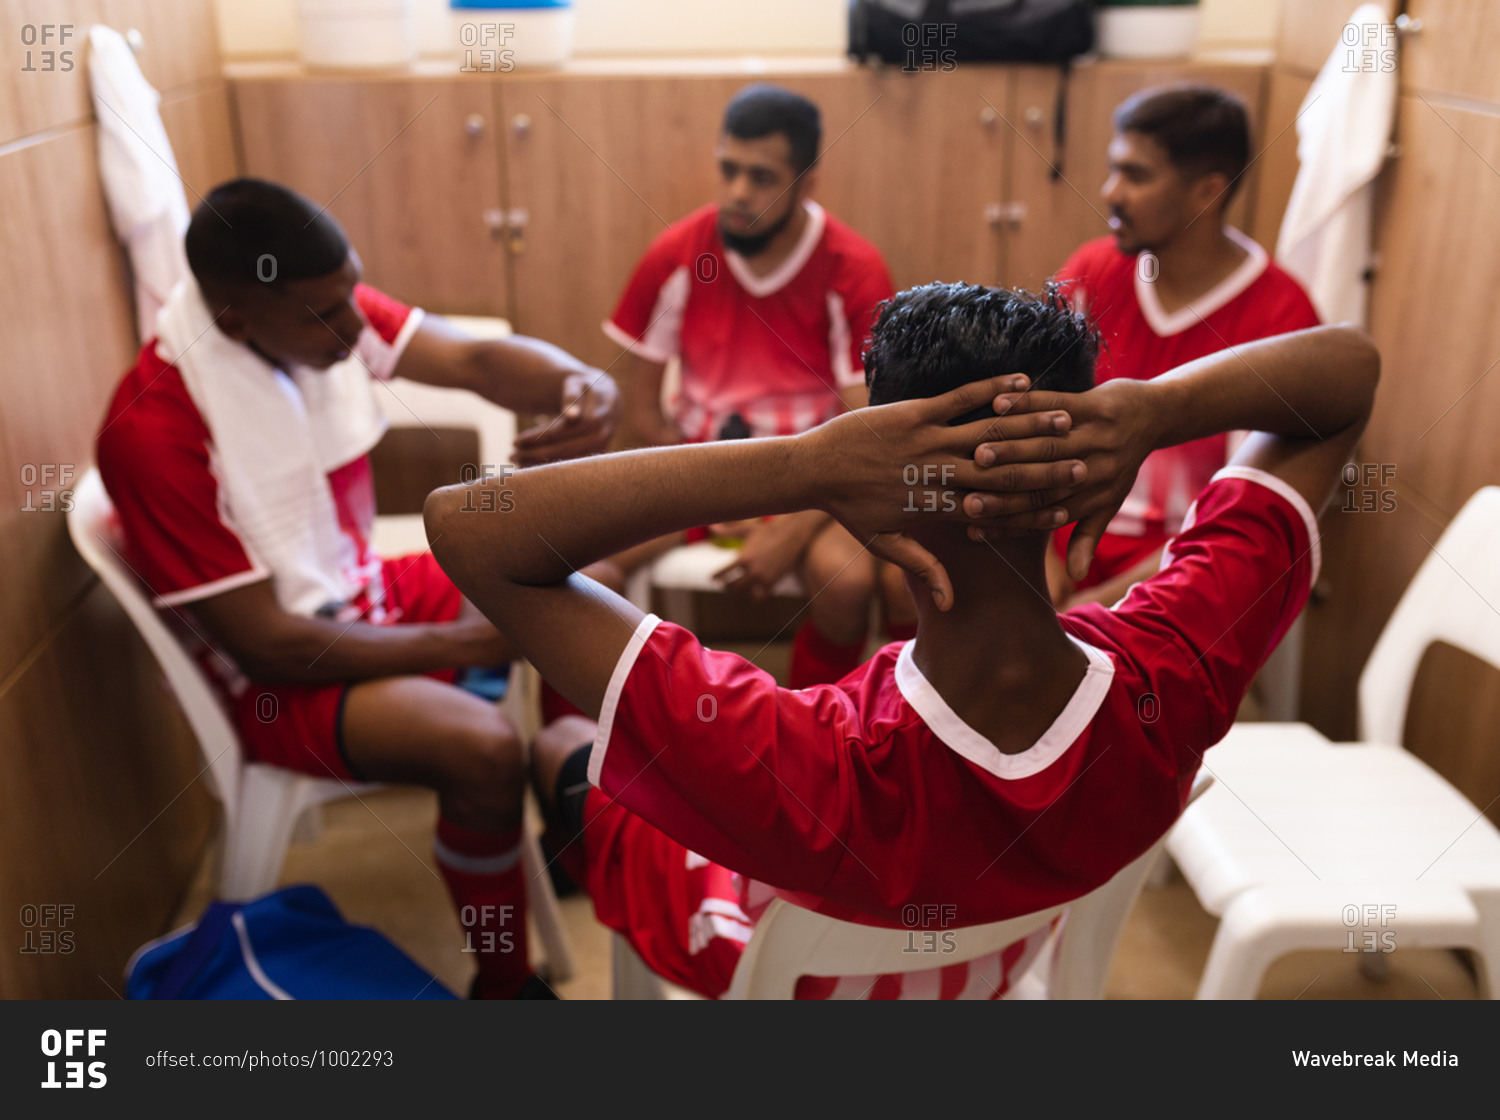 Multi ethnic group of male football players wearing a team strip sitting in changing room during a break in game, interacting and talking.